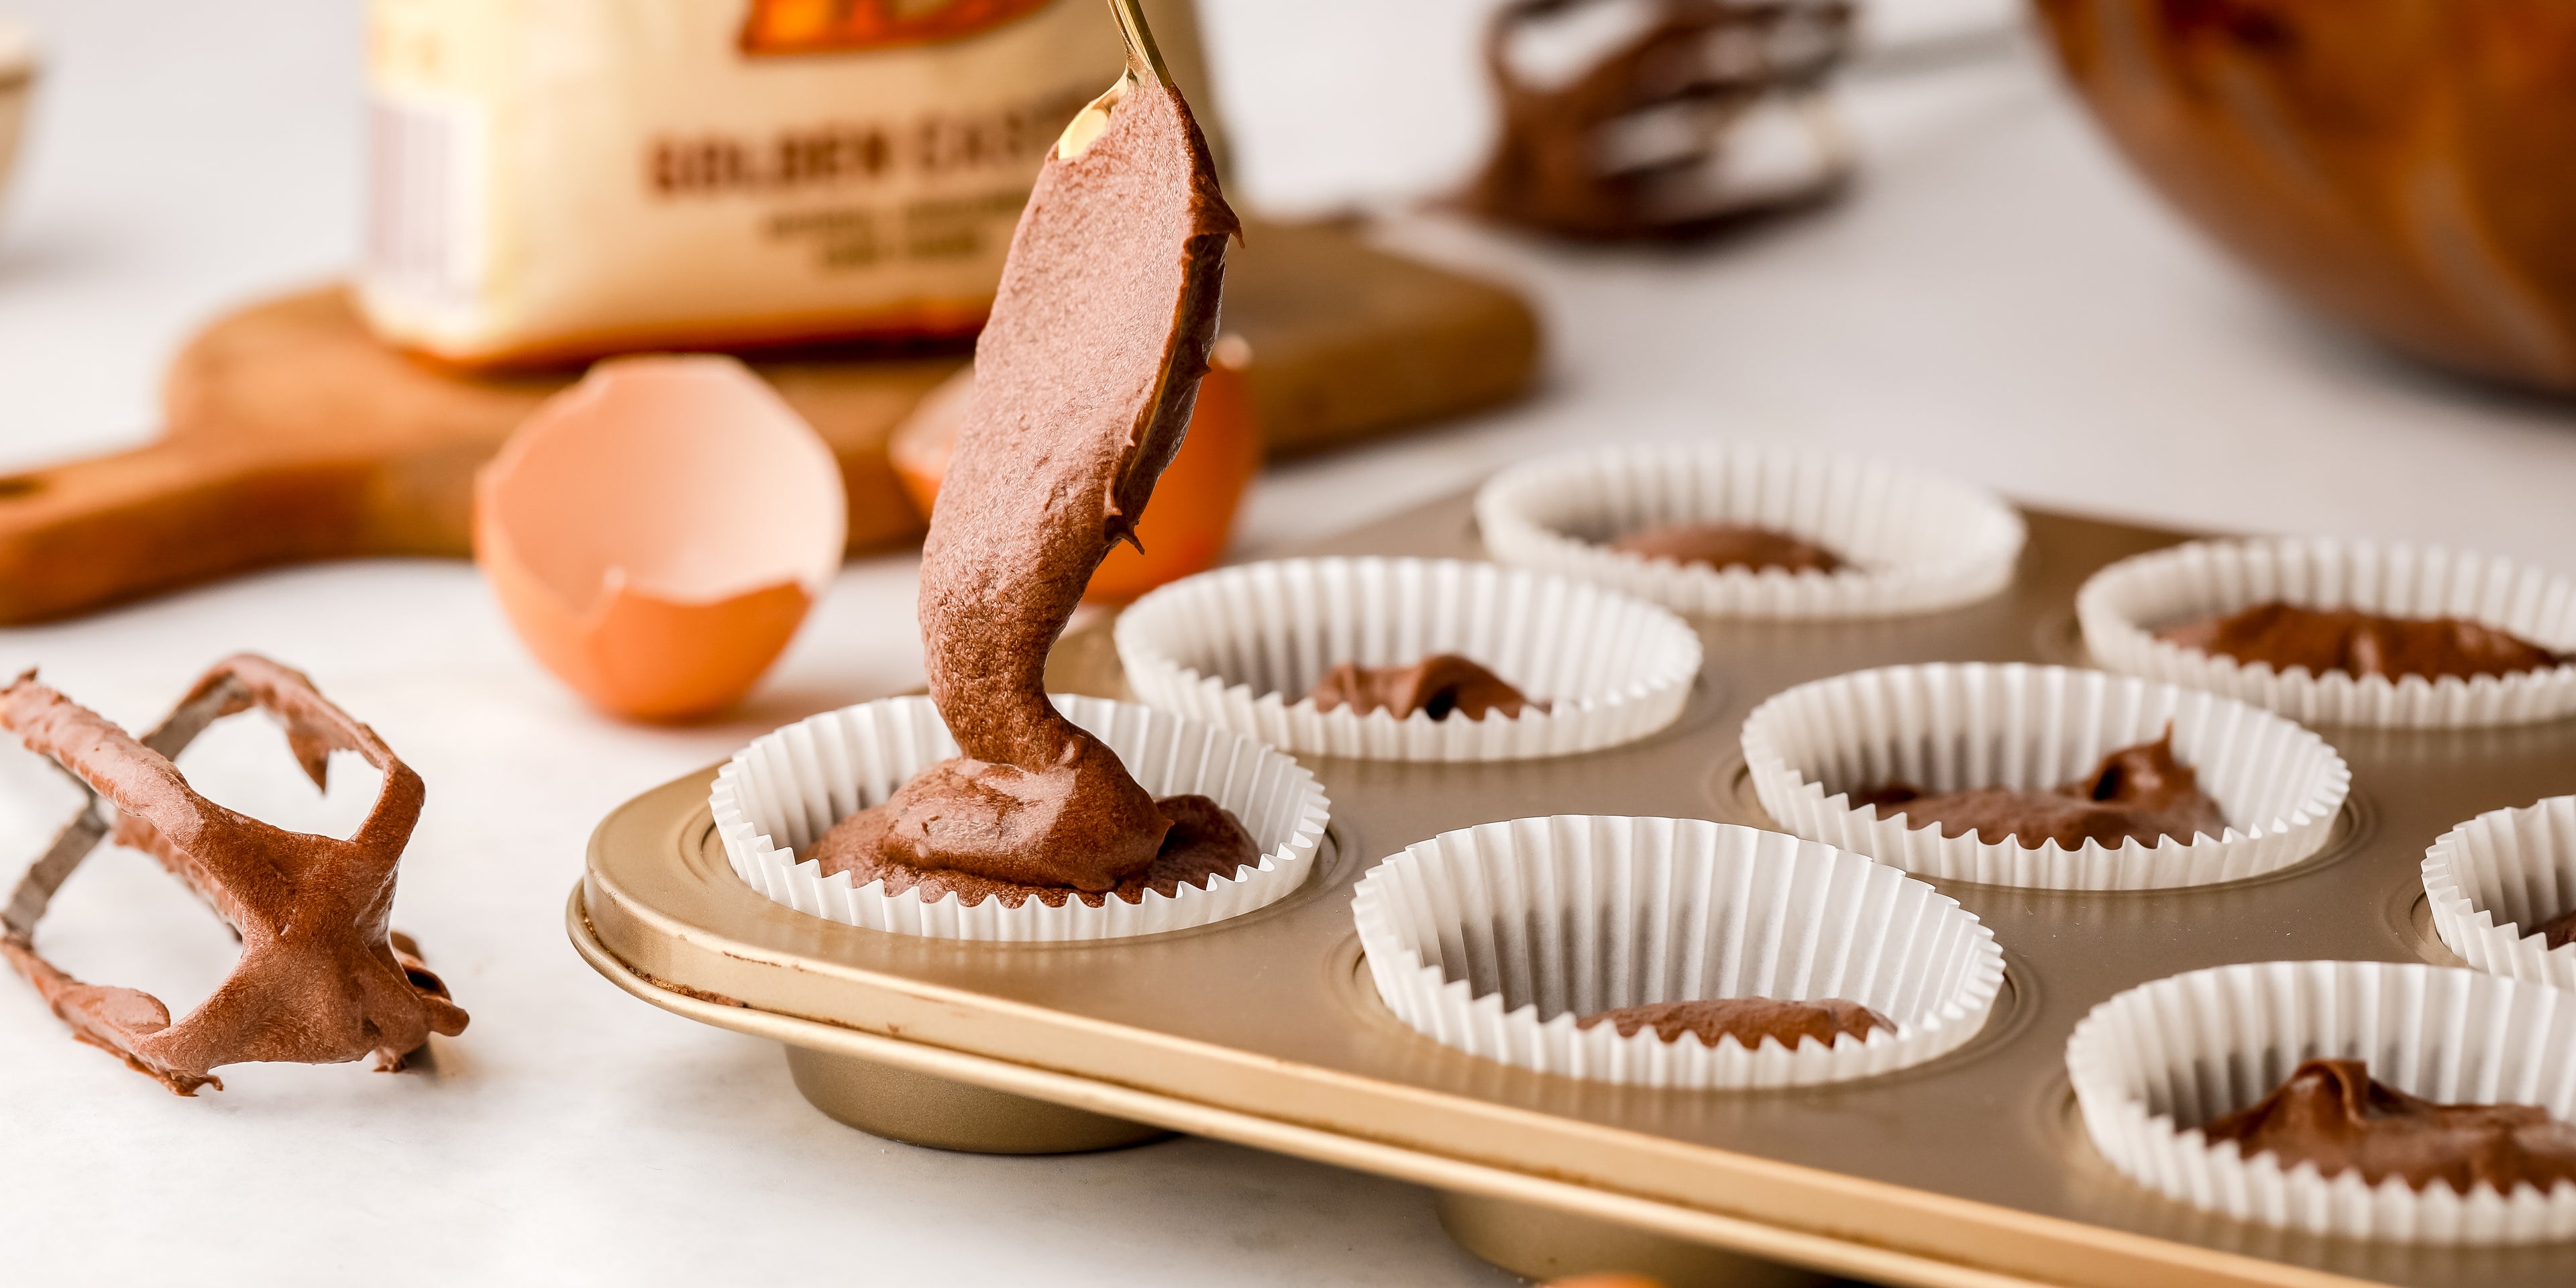 Chocolate cupcake batter being spooned into paper cake cases